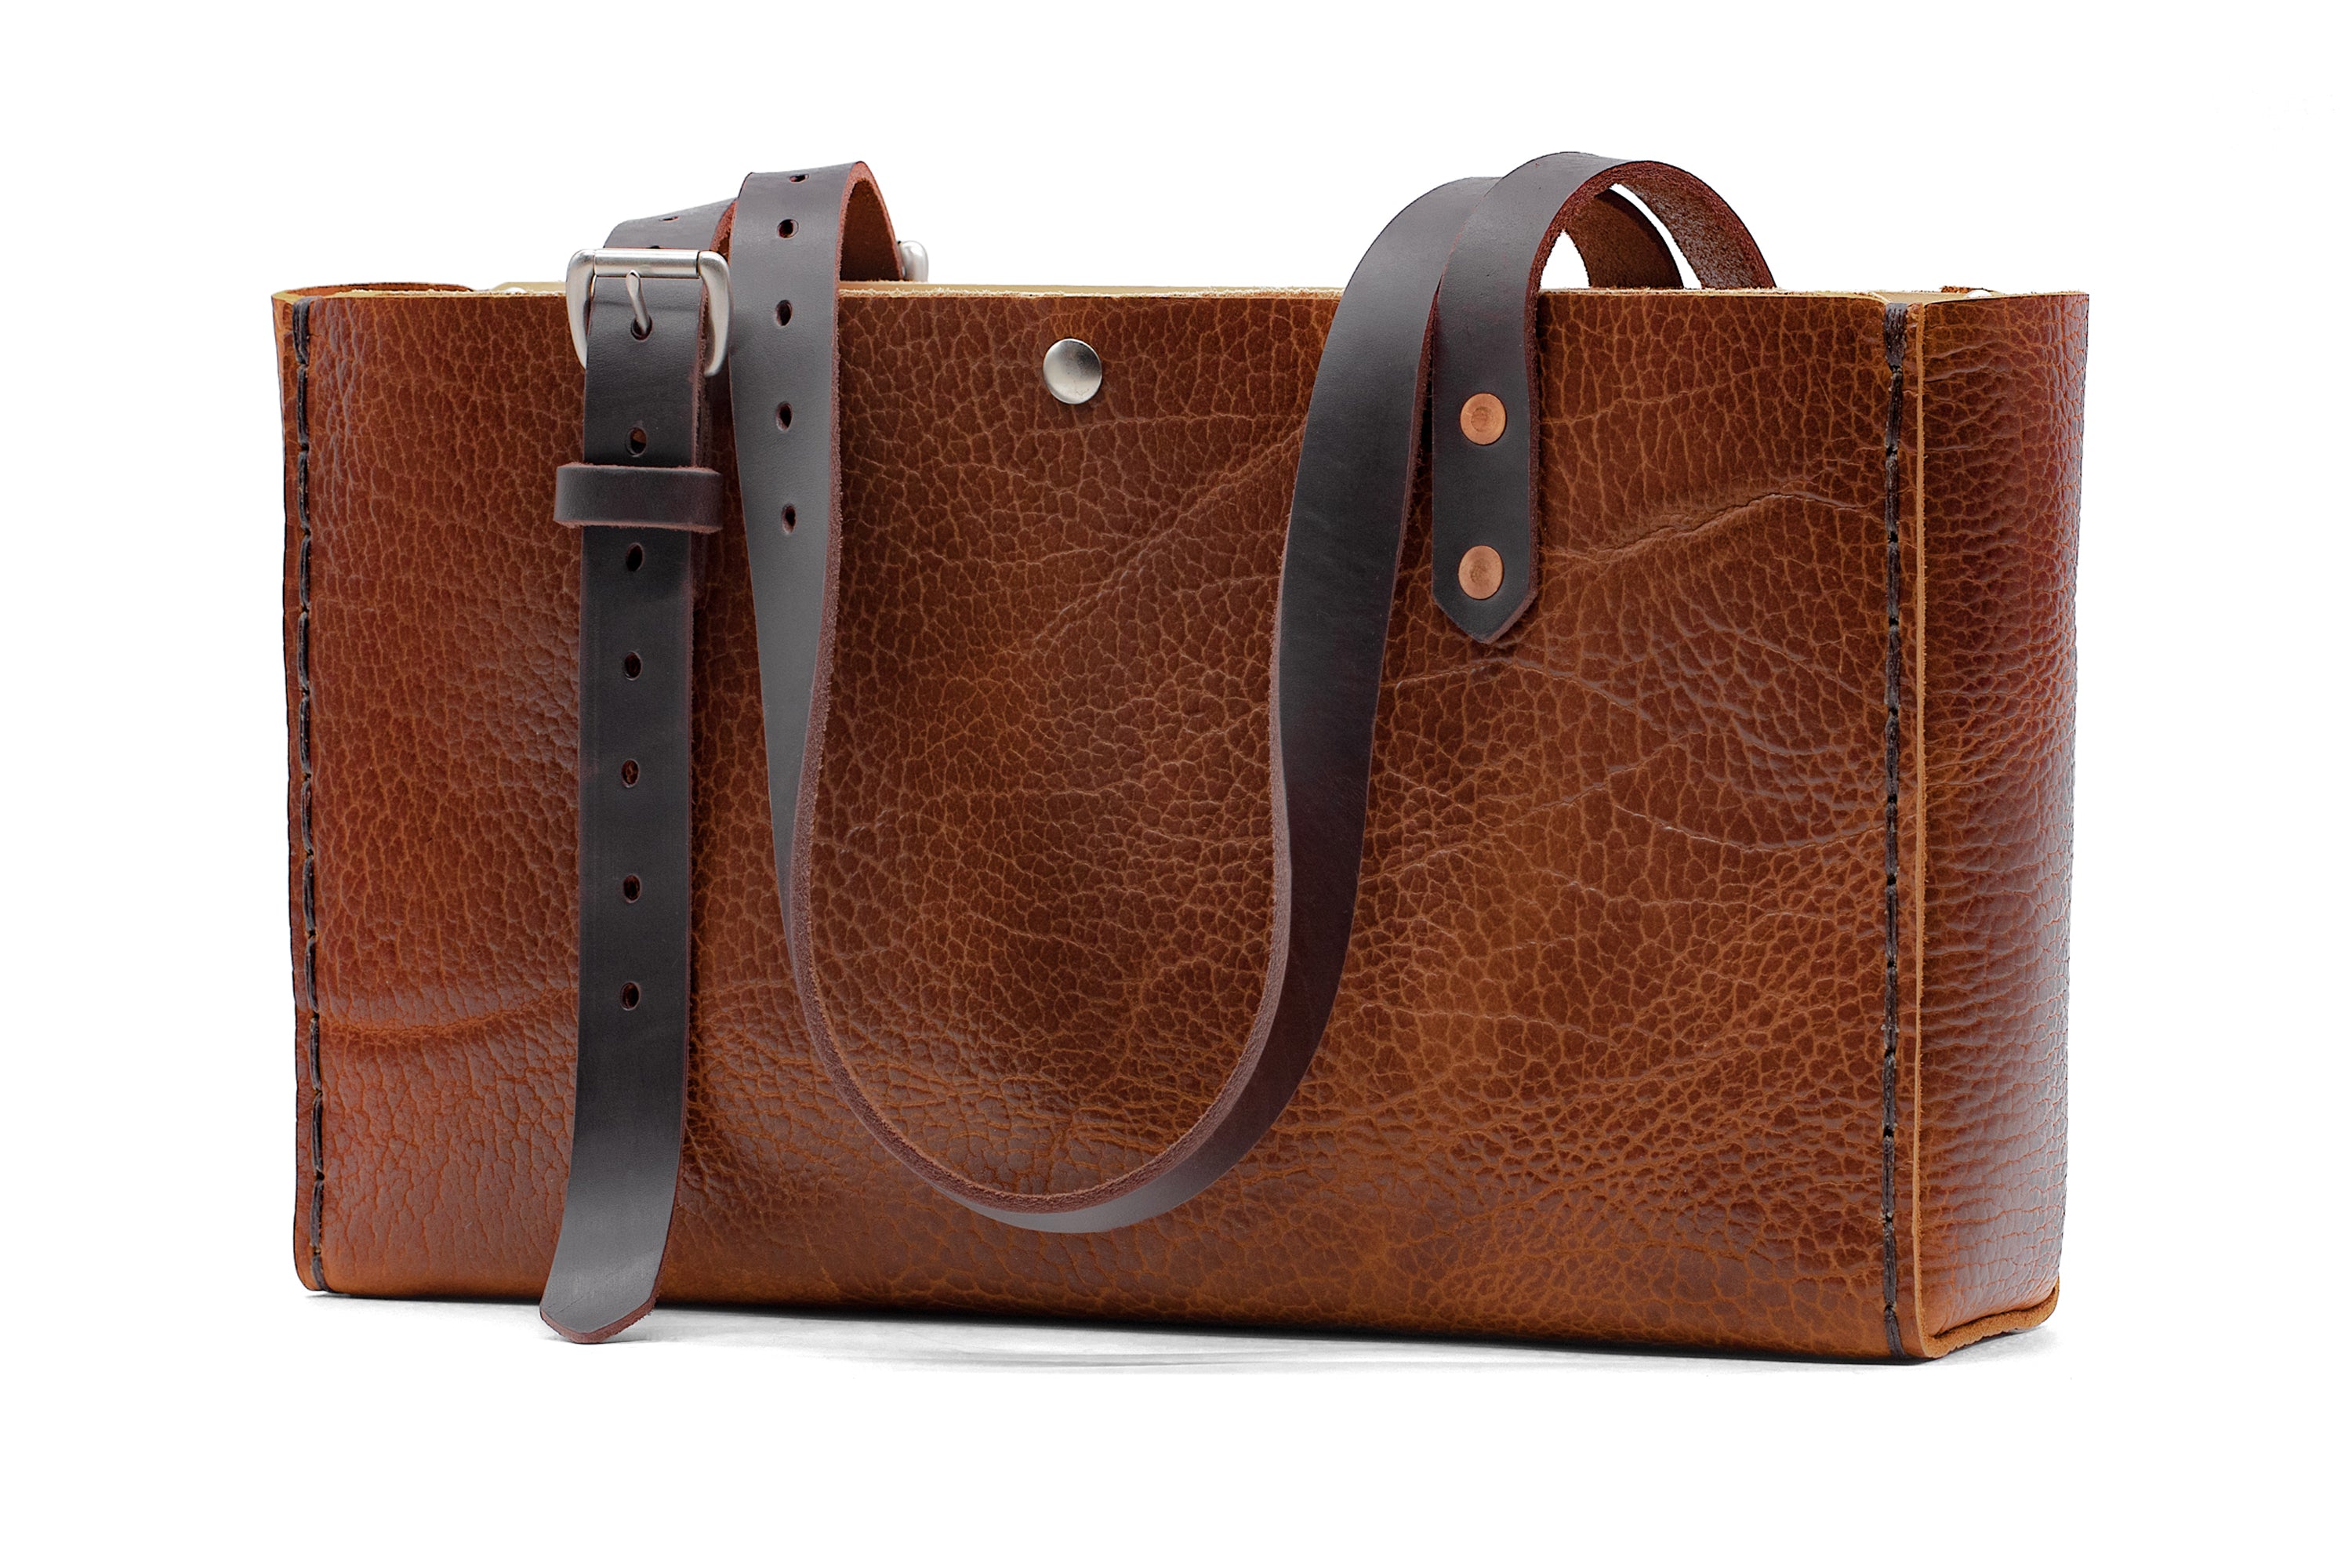 Limited Edition No. 714 Tote in Golden Yellowstone - Only 1 Made